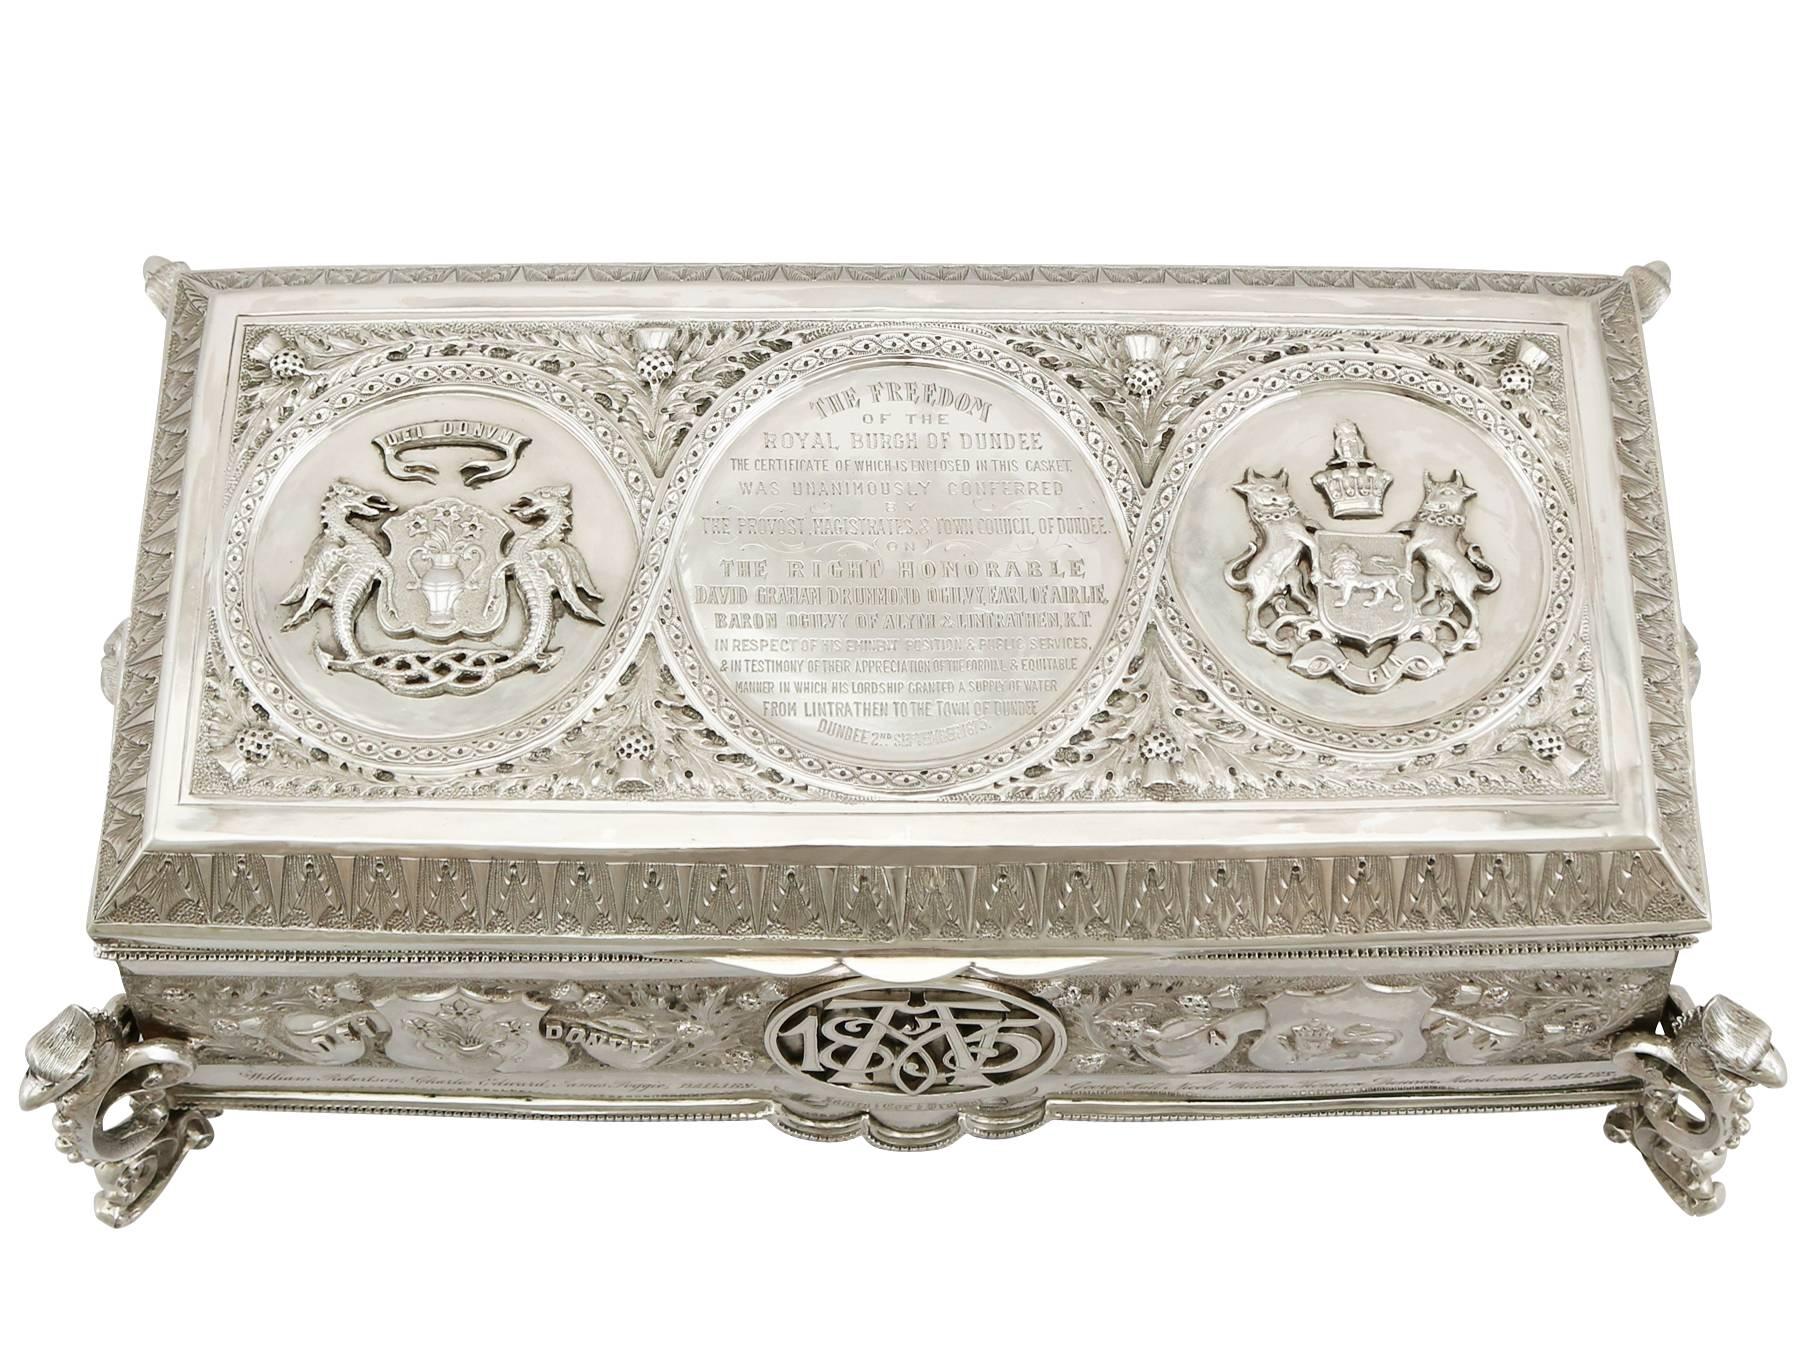 A magnificent, fine and impressive antique Victorian Scottish sterling silver freedom casket; an addition to our ornamental silver collection.

This magnificent antique Victorian Scottish sterling silver freedom casket has a rectangular